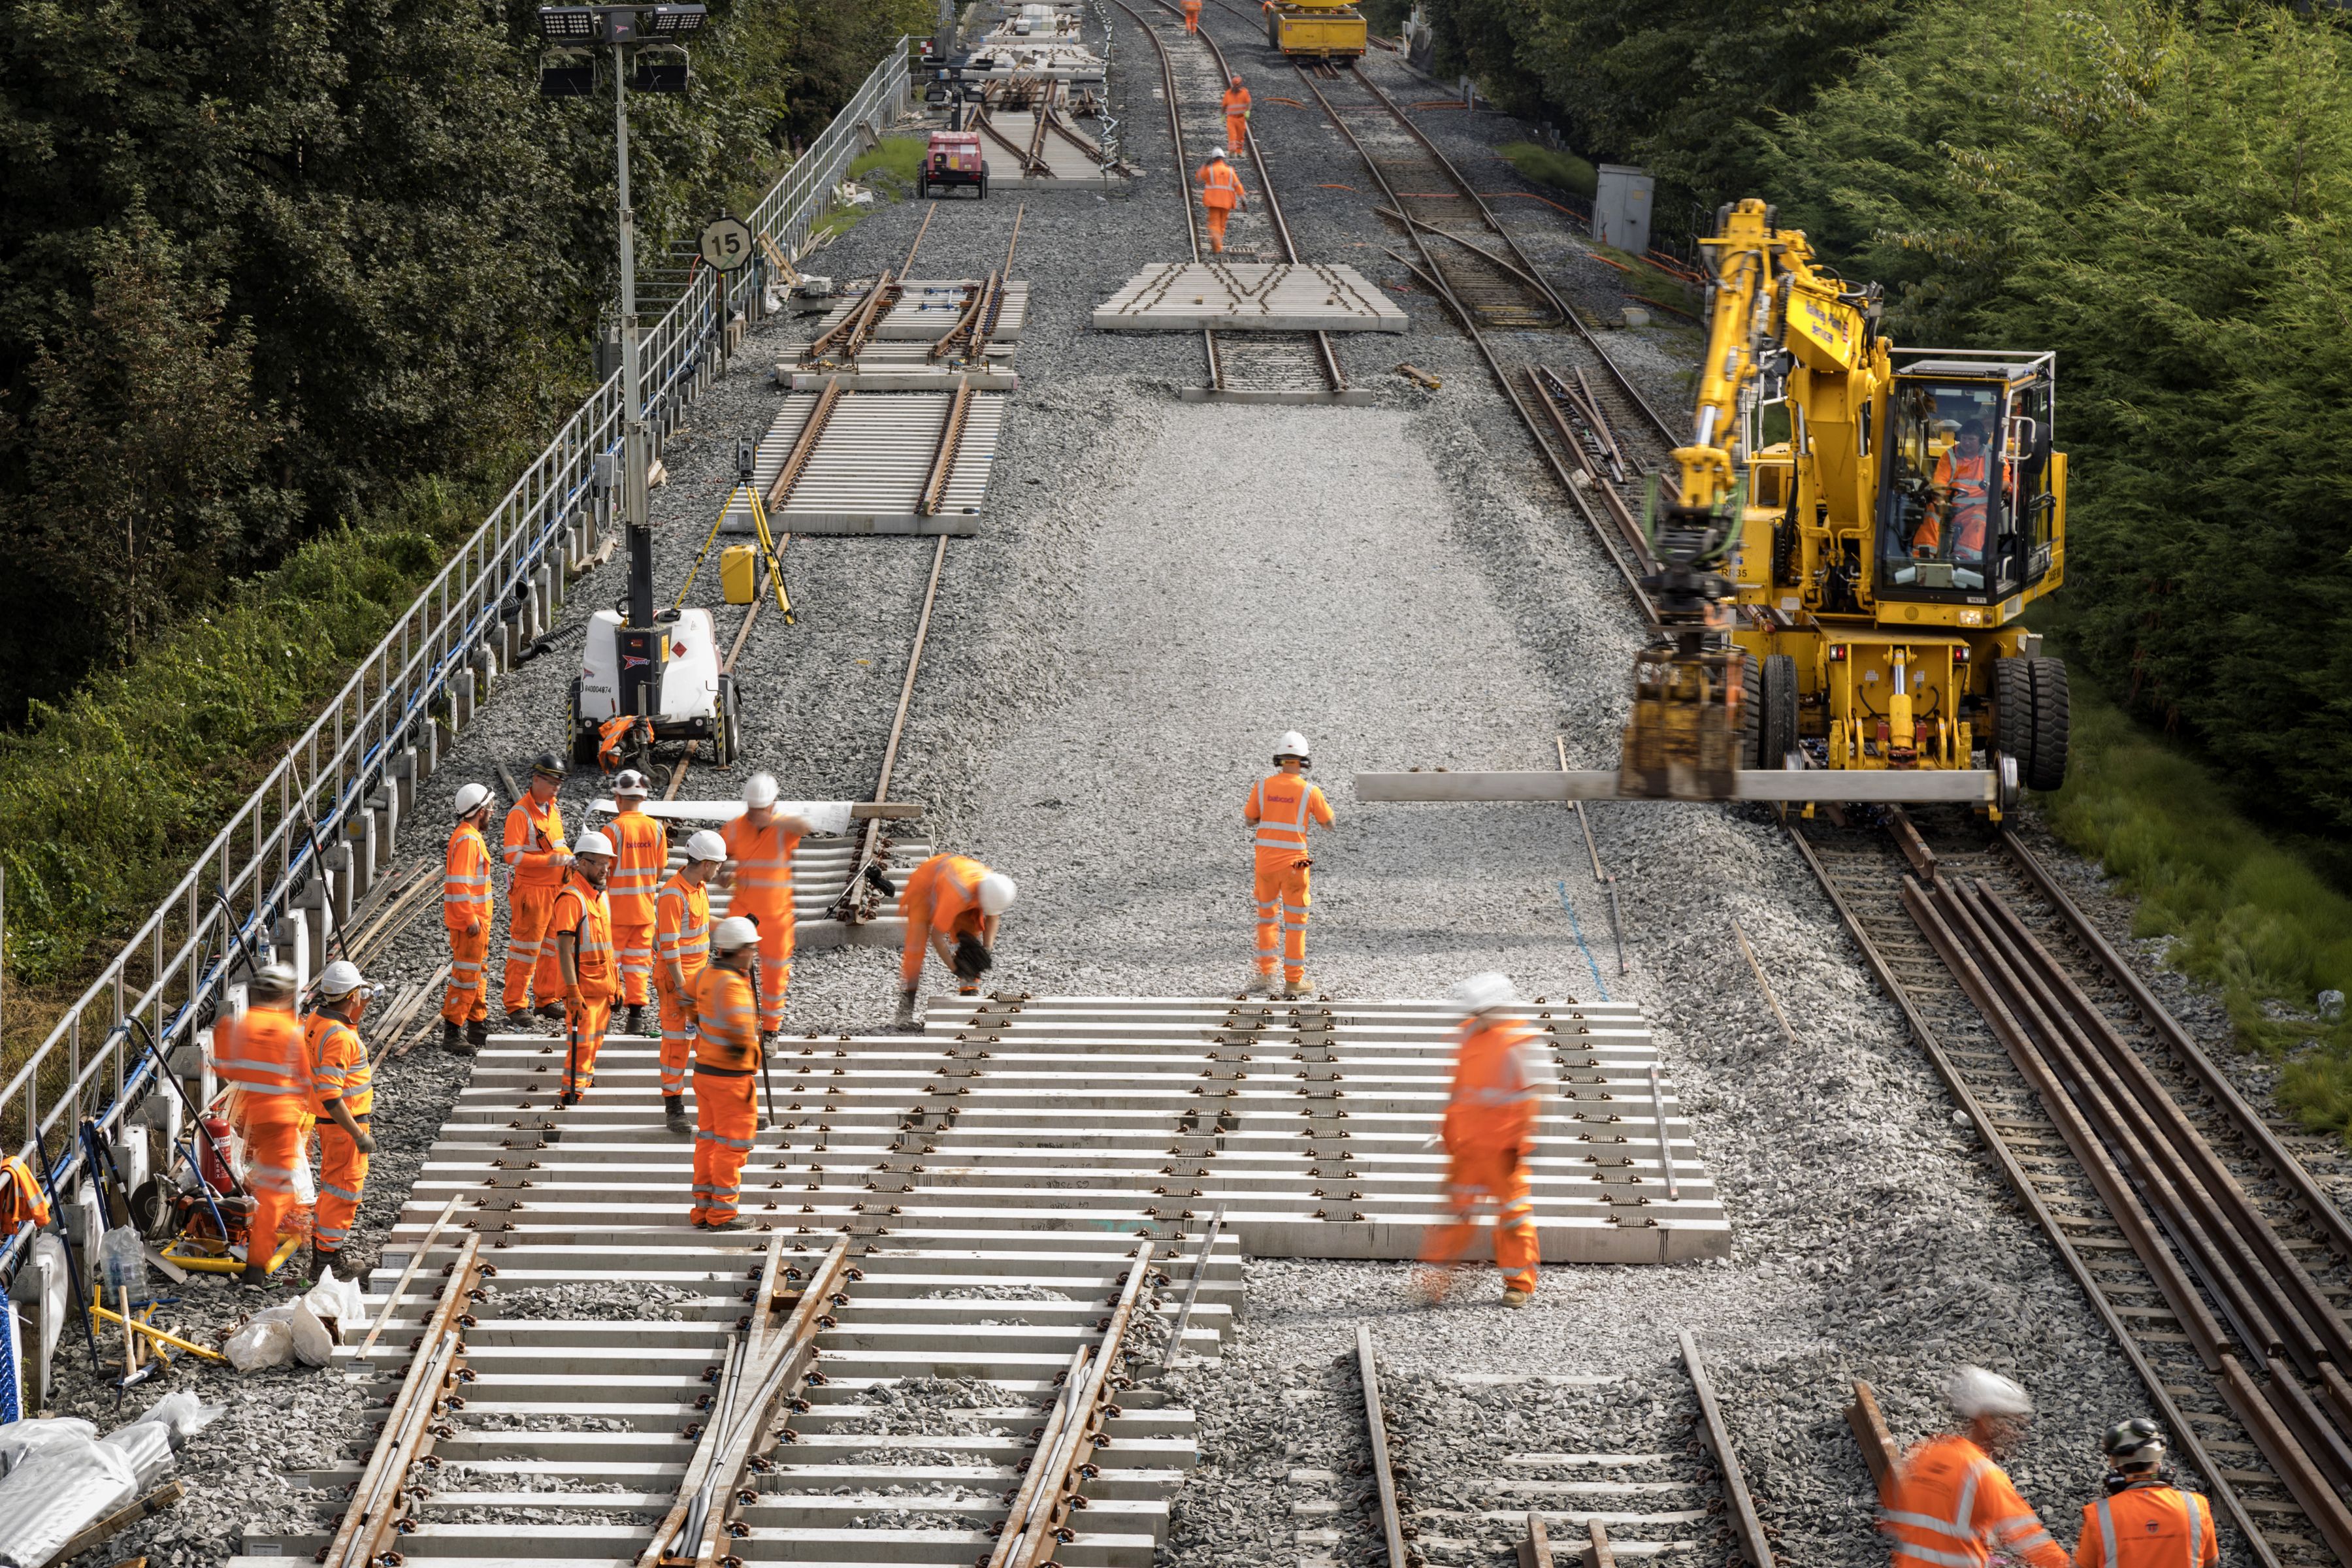 UPGRADE: Engineering work is be taking place on the train tracks between Lanyon Place and Great Victoria Street